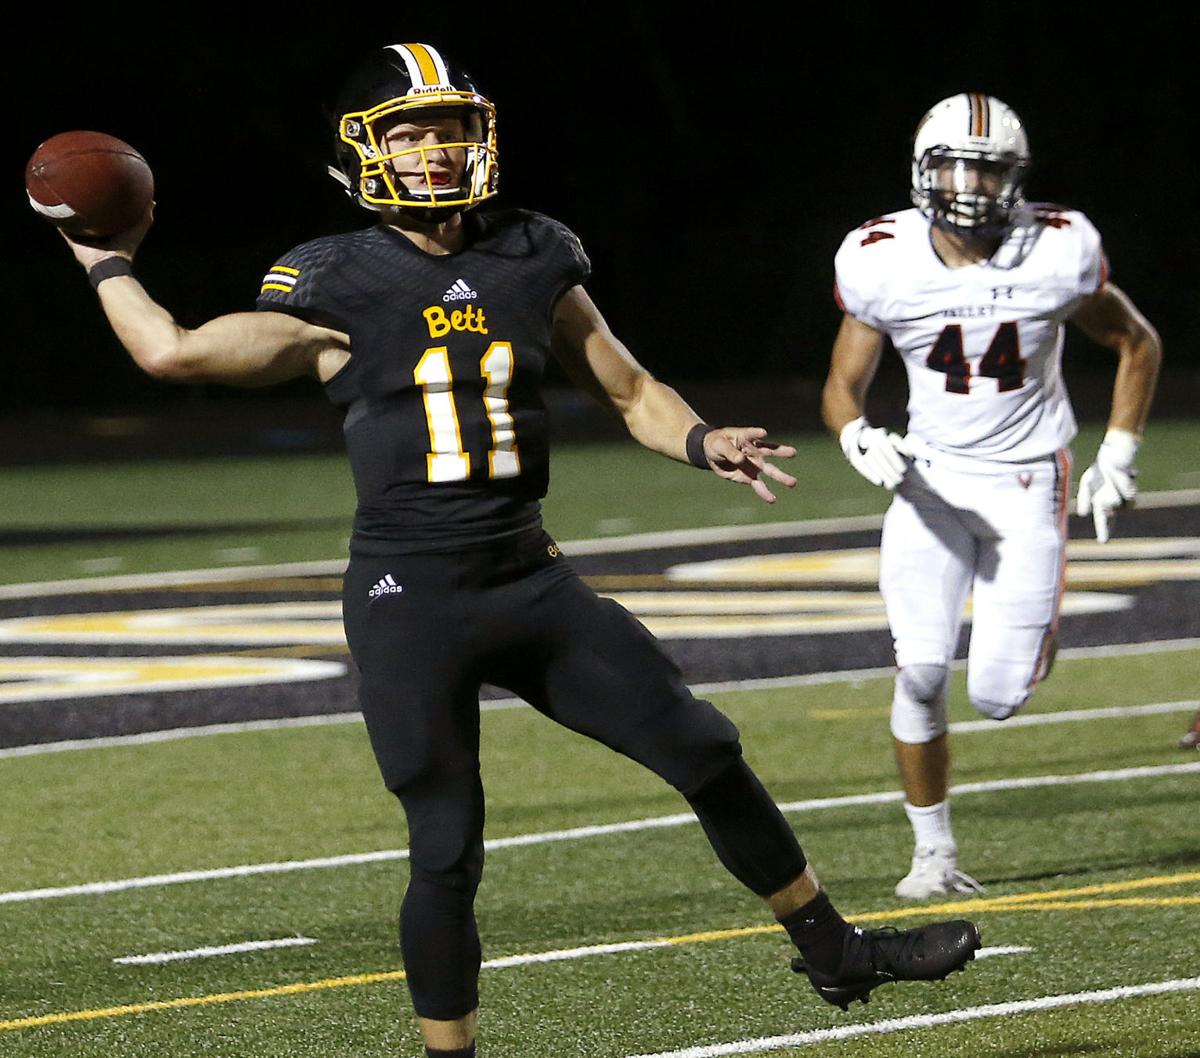 Bell showcases bigplay potential for Bettendorf High School Football